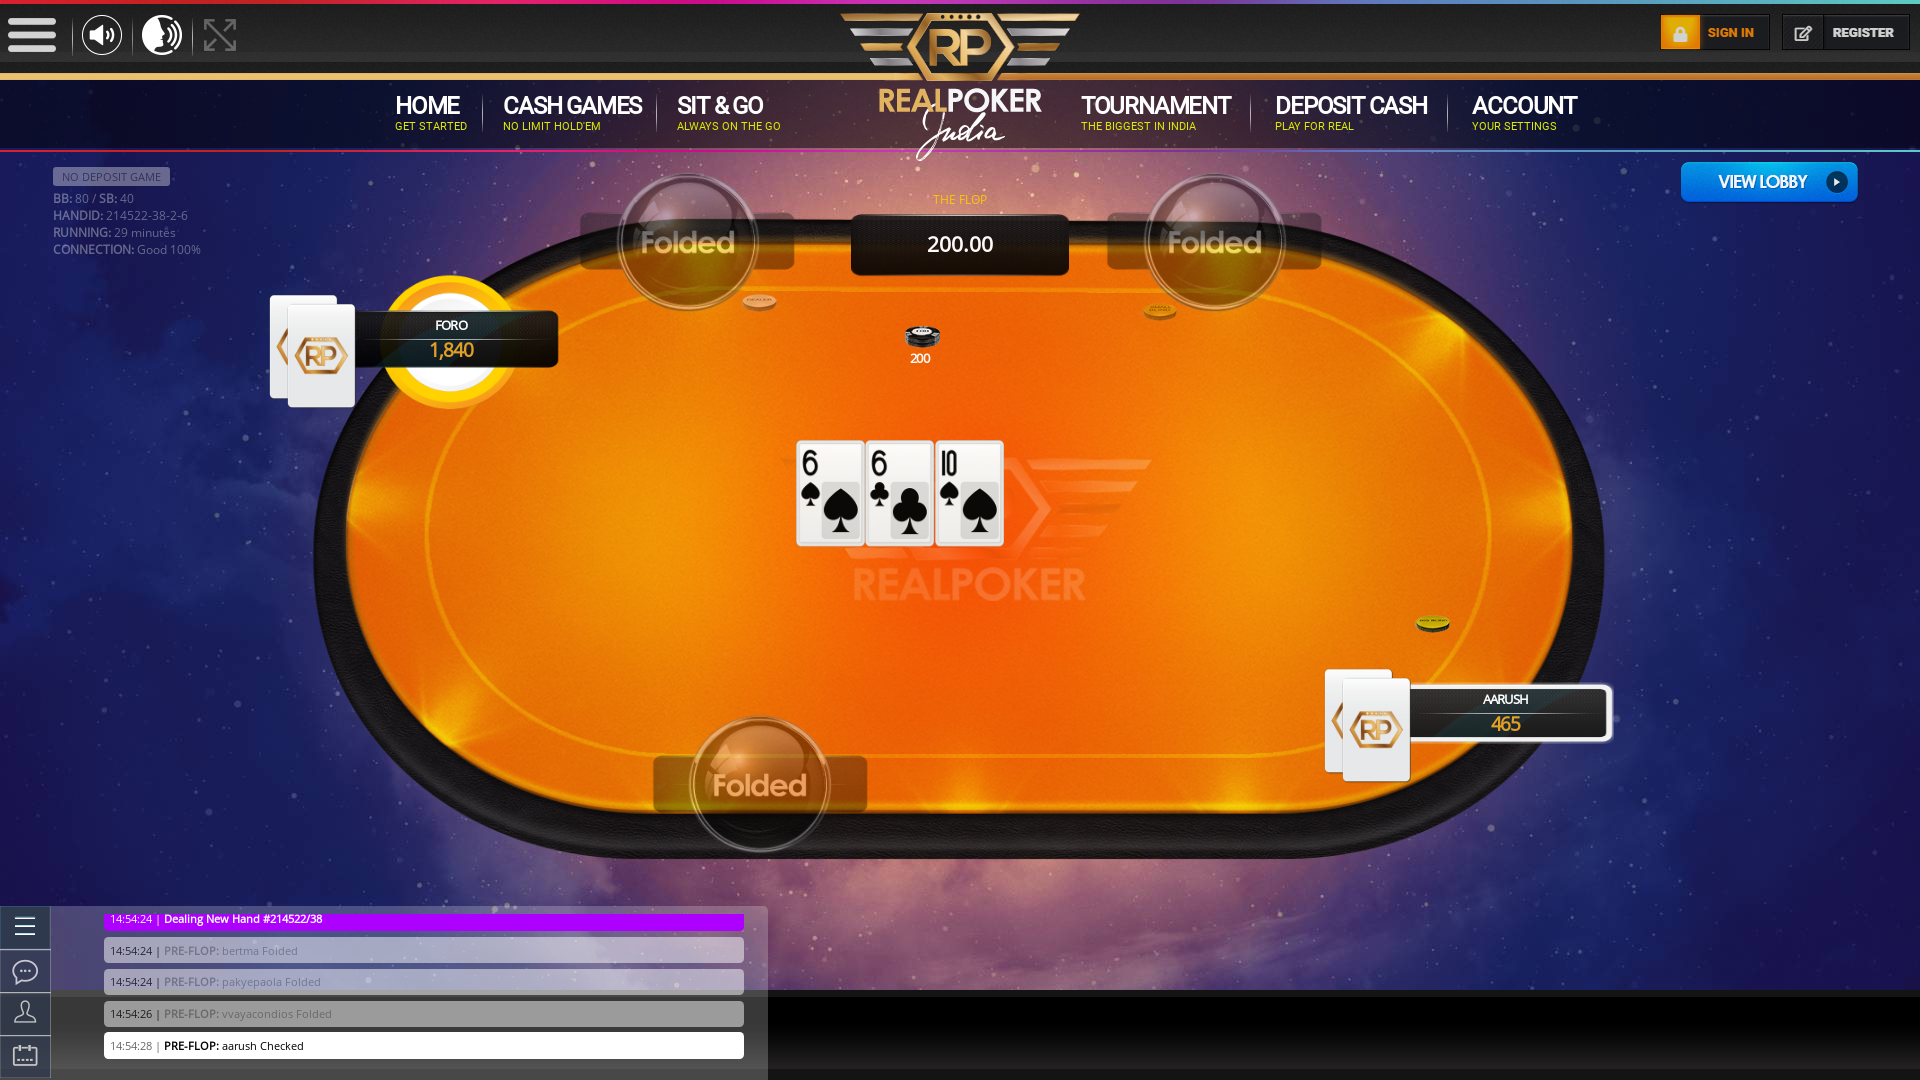 10 player texas holdem table at real poker with the table id 214522